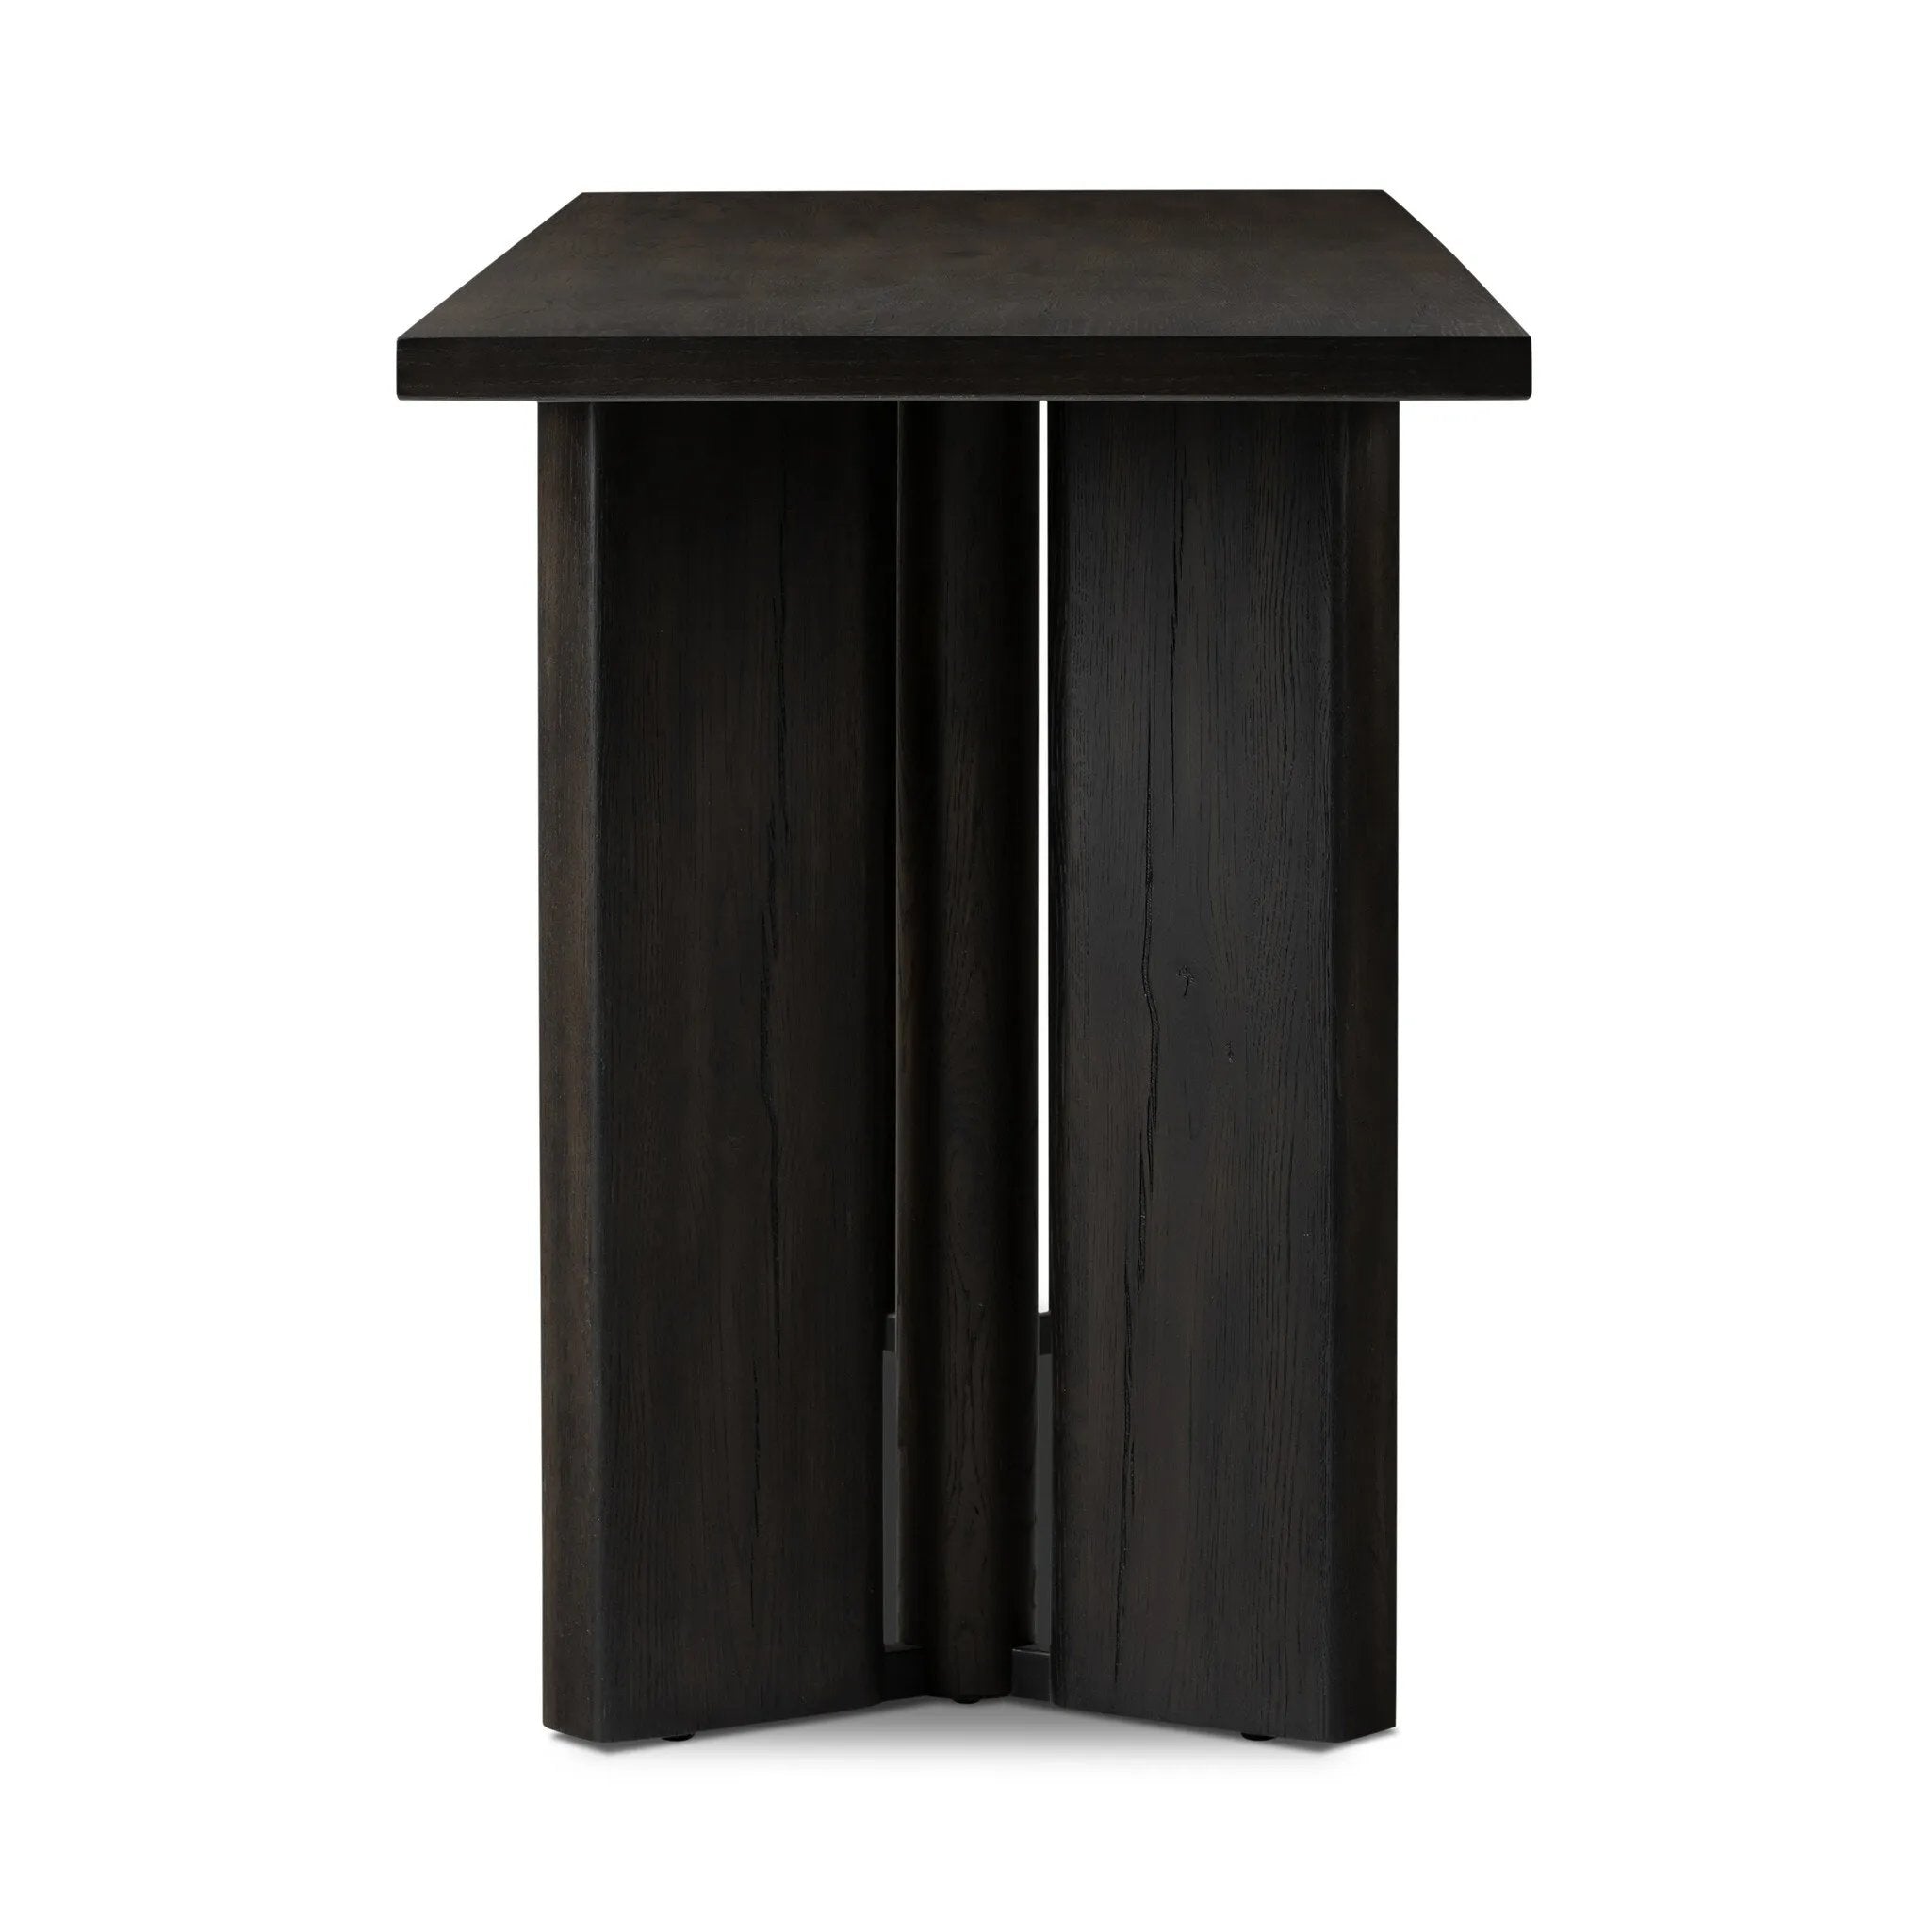 A smoked black finish delivers a character-rich look to an open-style console table. Angled panel legs up the intrigue factor.Collection: Haide Amethyst Home provides interior design, new home construction design consulting, vintage area rugs, and lighting in the Nashville metro area.